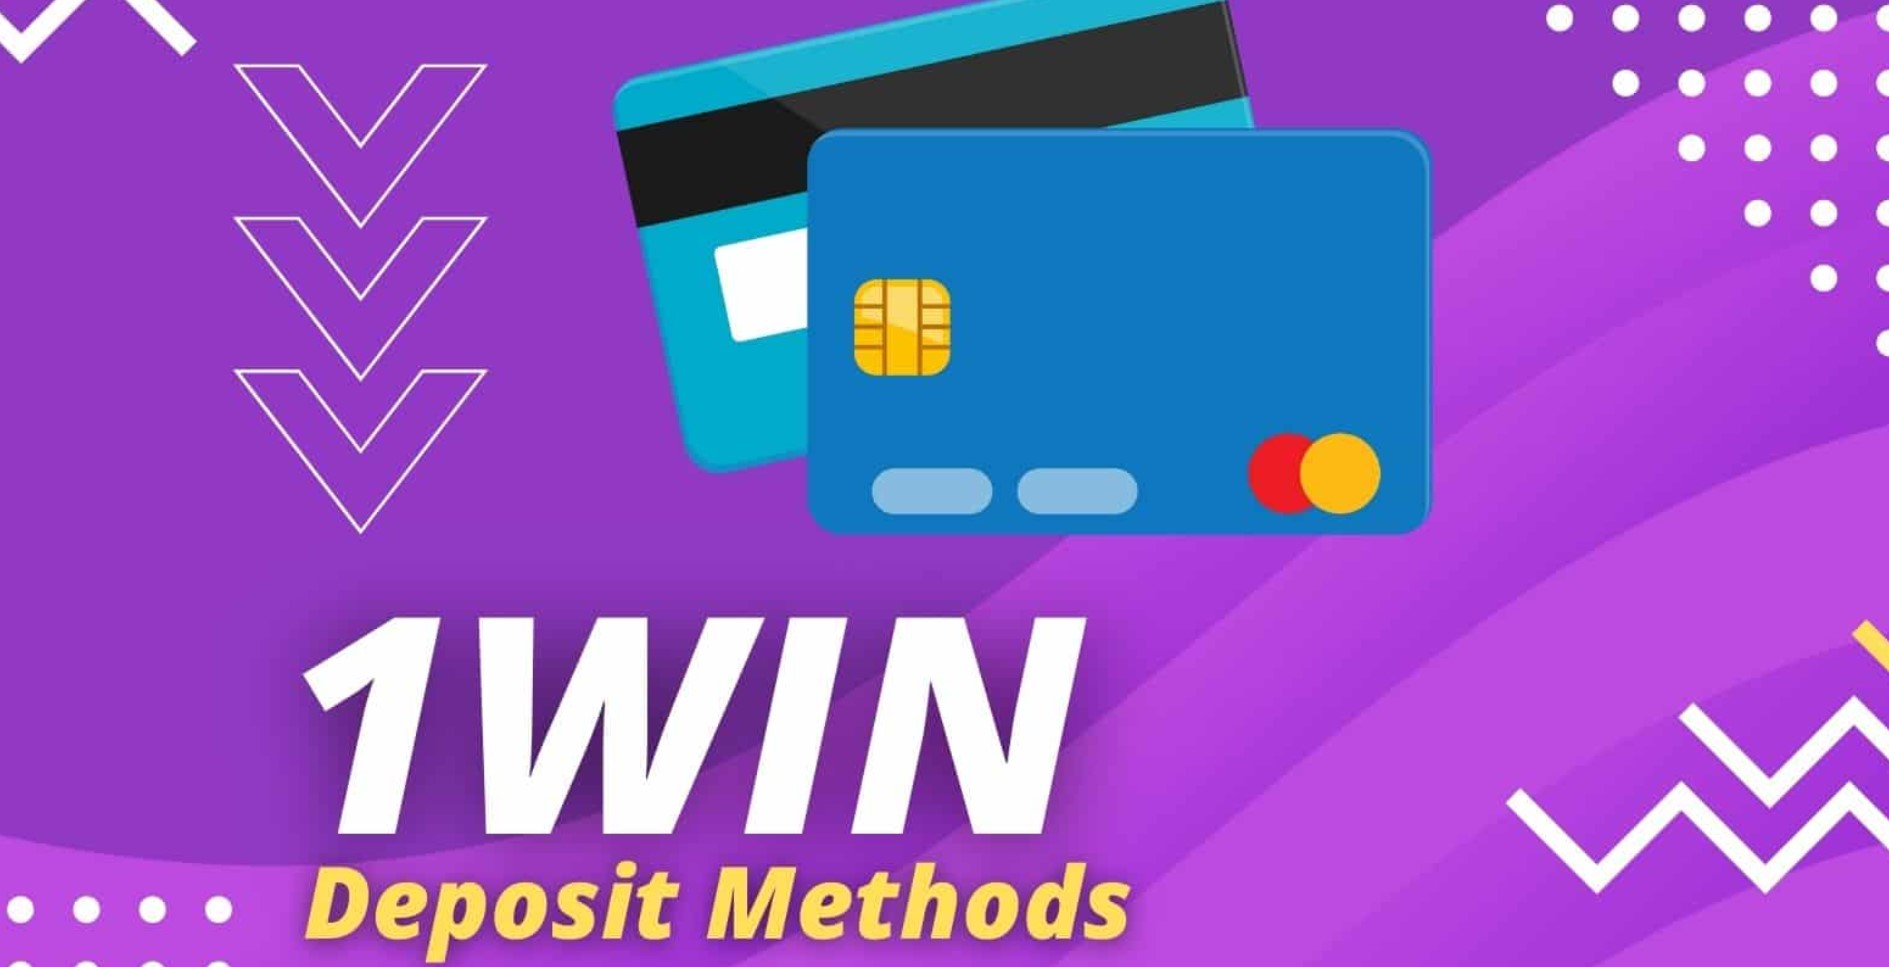 What deposit methods does 1Win casino support